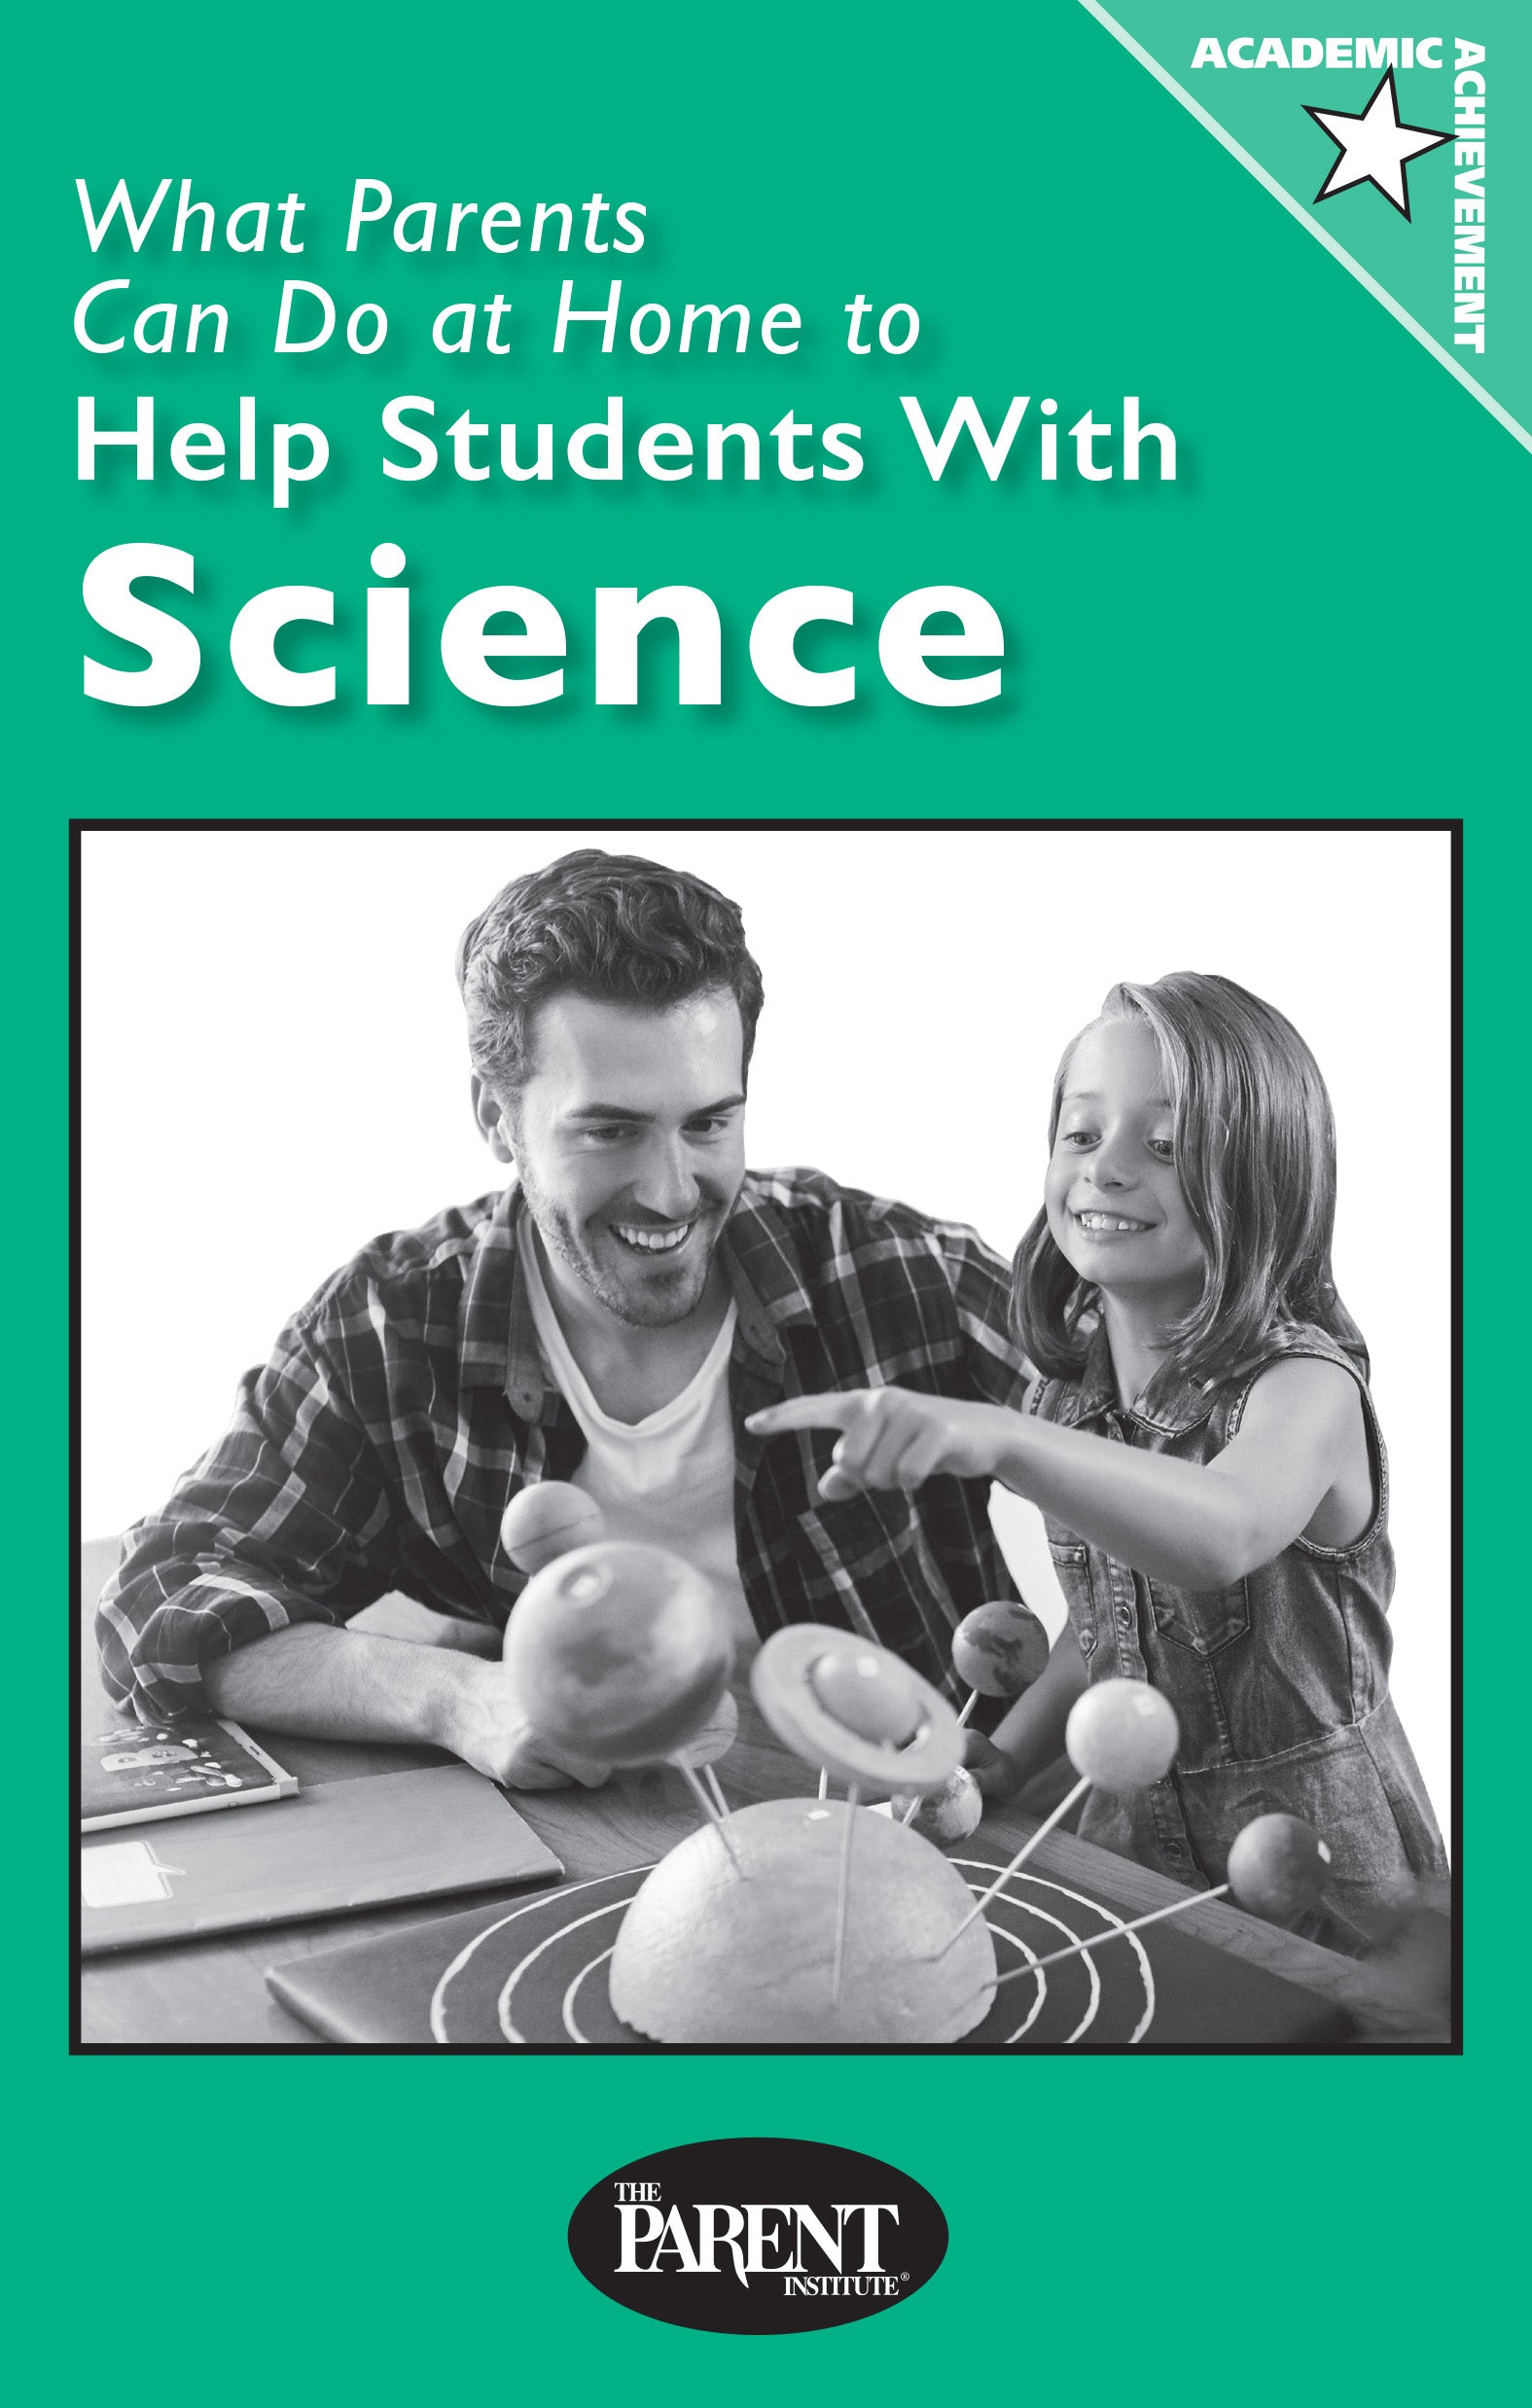 What Parents Can Do at Home to Help Students with Science